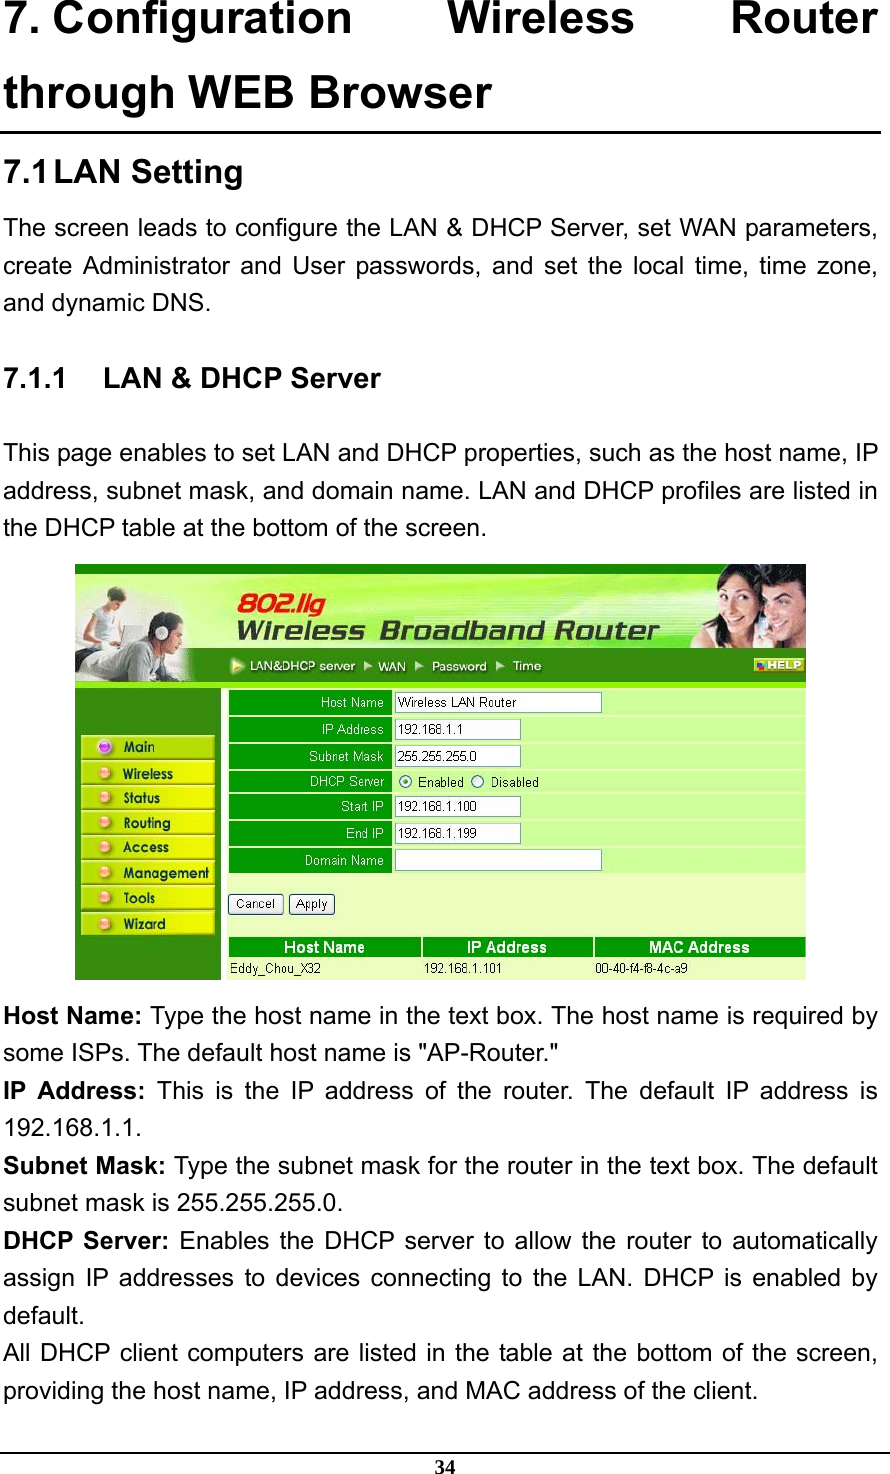 34 7. Configuration Wireless Router through WEB Browser 7.1 LAN  Setting The screen leads to configure the LAN &amp; DHCP Server, set WAN parameters, create Administrator and User passwords, and set the local time, time zone, and dynamic DNS. 7.1.1  LAN &amp; DHCP Server This page enables to set LAN and DHCP properties, such as the host name, IP address, subnet mask, and domain name. LAN and DHCP profiles are listed in the DHCP table at the bottom of the screen.  Host Name: Type the host name in the text box. The host name is required by some ISPs. The default host name is &quot;AP-Router.&quot; IP Address: This is the IP address of the router. The default IP address is 192.168.1.1. Subnet Mask: Type the subnet mask for the router in the text box. The default subnet mask is 255.255.255.0. DHCP Server: Enables the DHCP server to allow the router to automatically assign IP addresses to devices connecting to the LAN. DHCP is enabled by default. All DHCP client computers are listed in the table at the bottom of the screen, providing the host name, IP address, and MAC address of the client. 